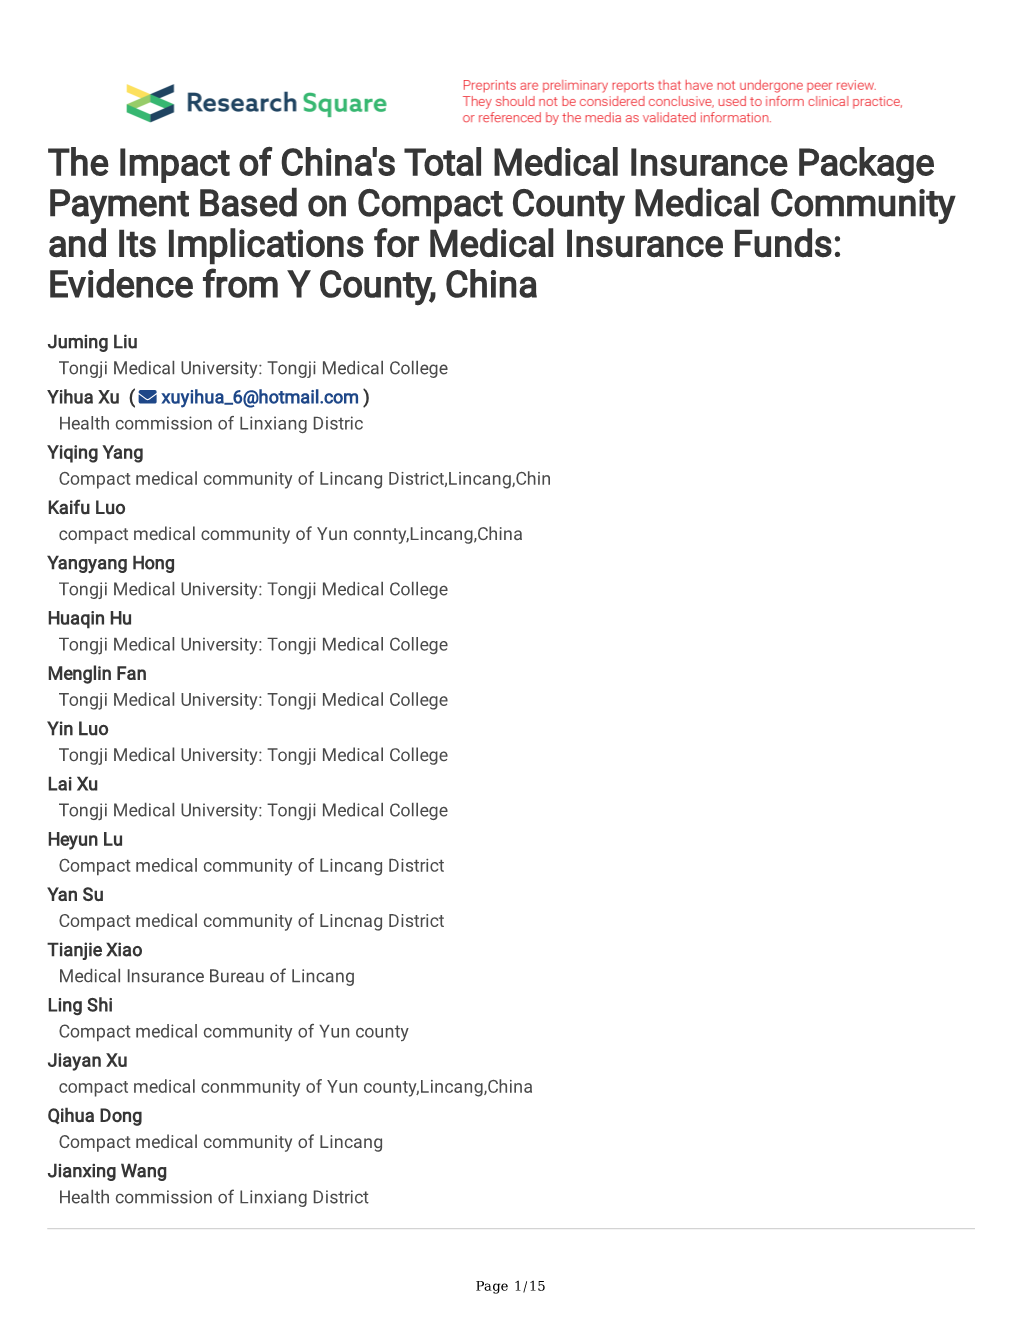 The Impact of China's Total Medical Insurance Package Payment Based